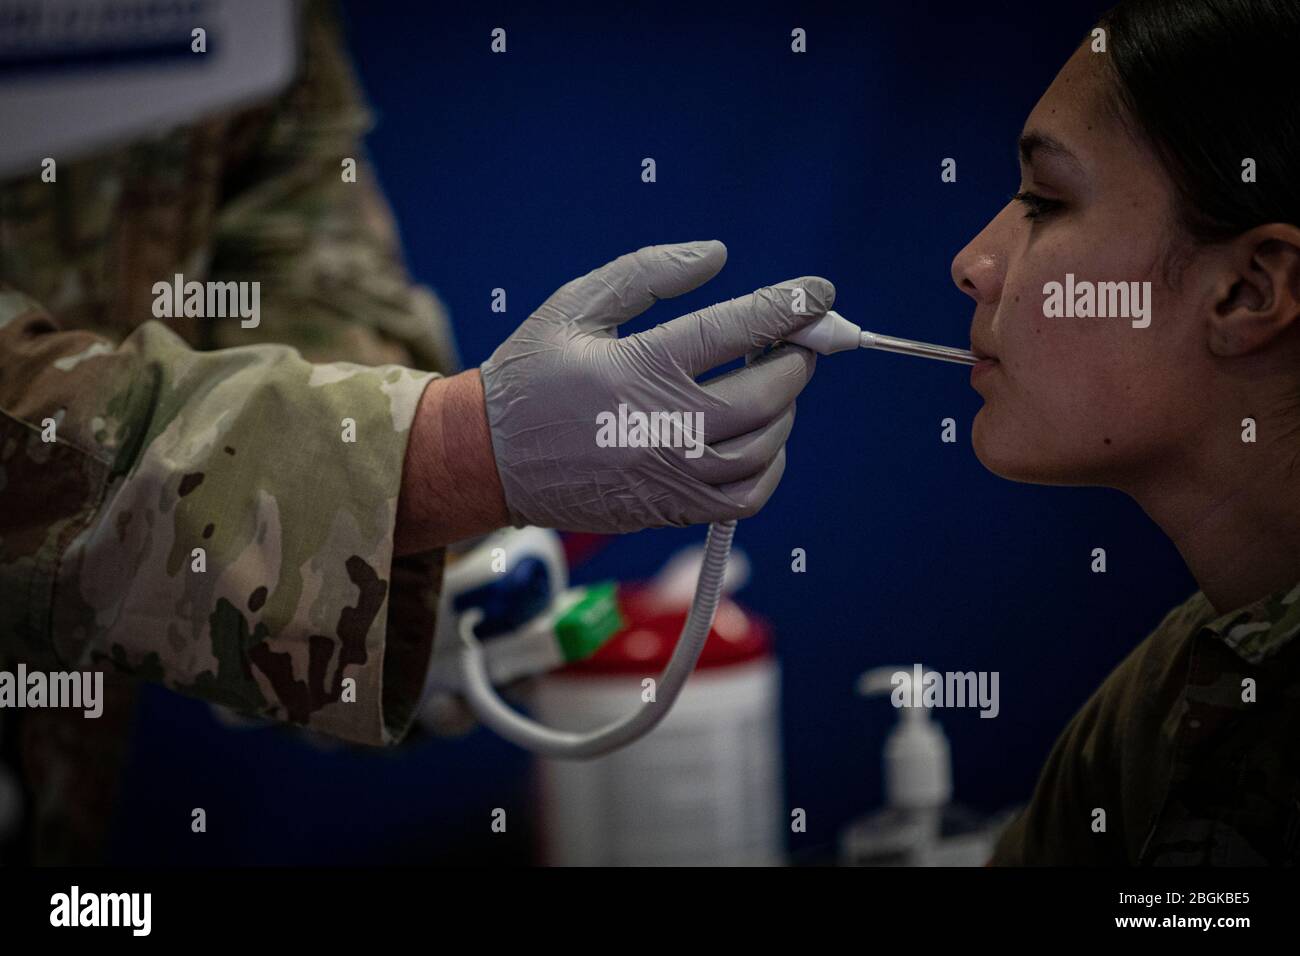 A New Jersey Army National Guard Soldier with the 143rd Transportation Company has her temperature checked during medical screening for state activation at the Teaneck Armory in Teaneck, N.J., March 19, 2020. The New Jersey National Guard has more than 150 members activated to support state and local authorities during the COVID-19 outbreak. Bother the 508th and 143rd will be working with the New Jersey Department of Health and local first responders at a mobile testing facility located at Bergen Community College in Paramus, N.J. (U.S. Air National Guard photo by Master Sgt. Matt Hecht) Stock Photo